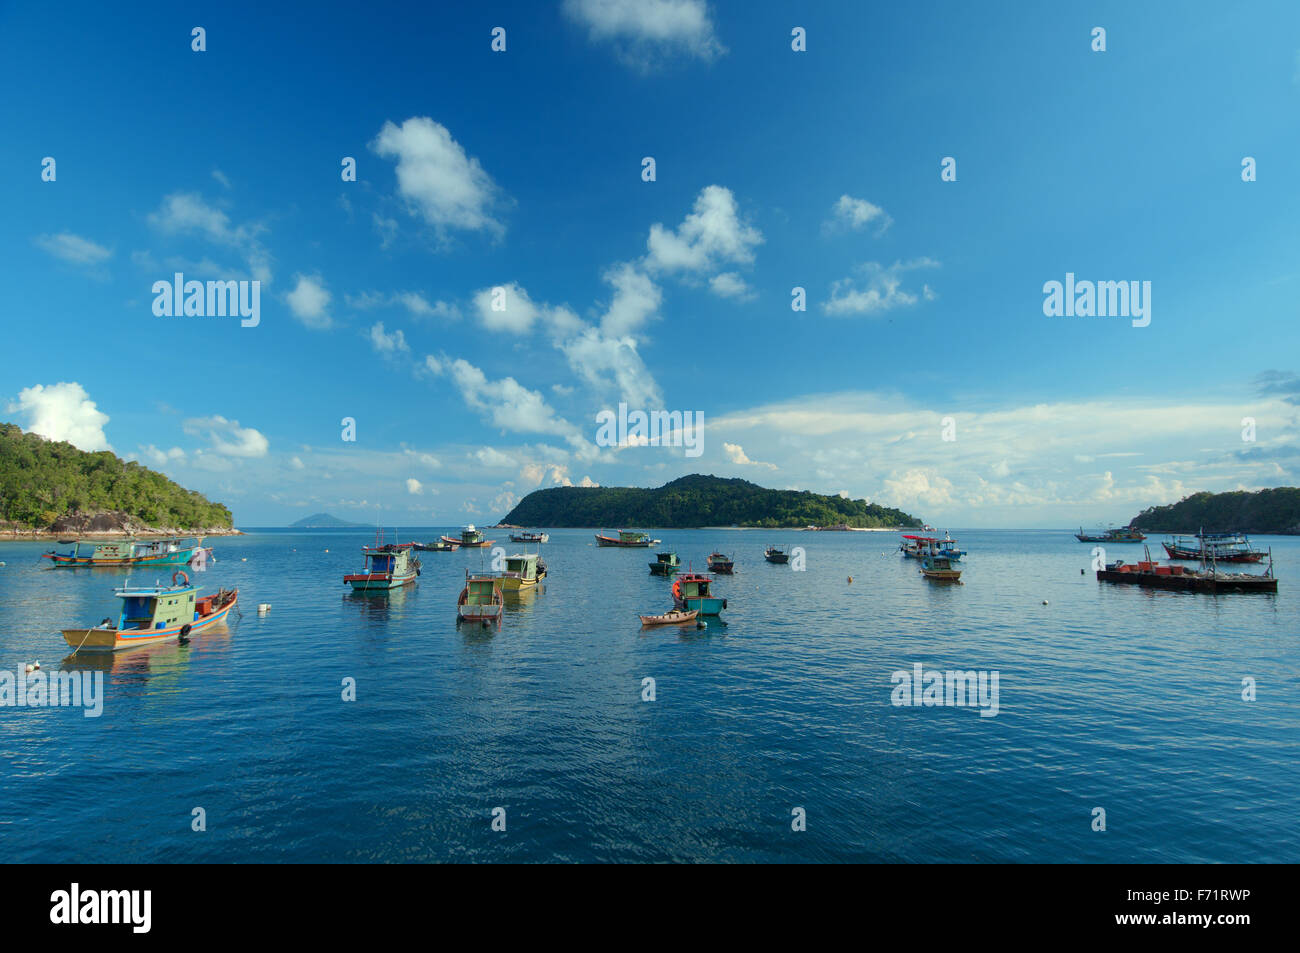 A lot of boats in the Gulf Redang Island, Malaysia, Asia Stock Photo